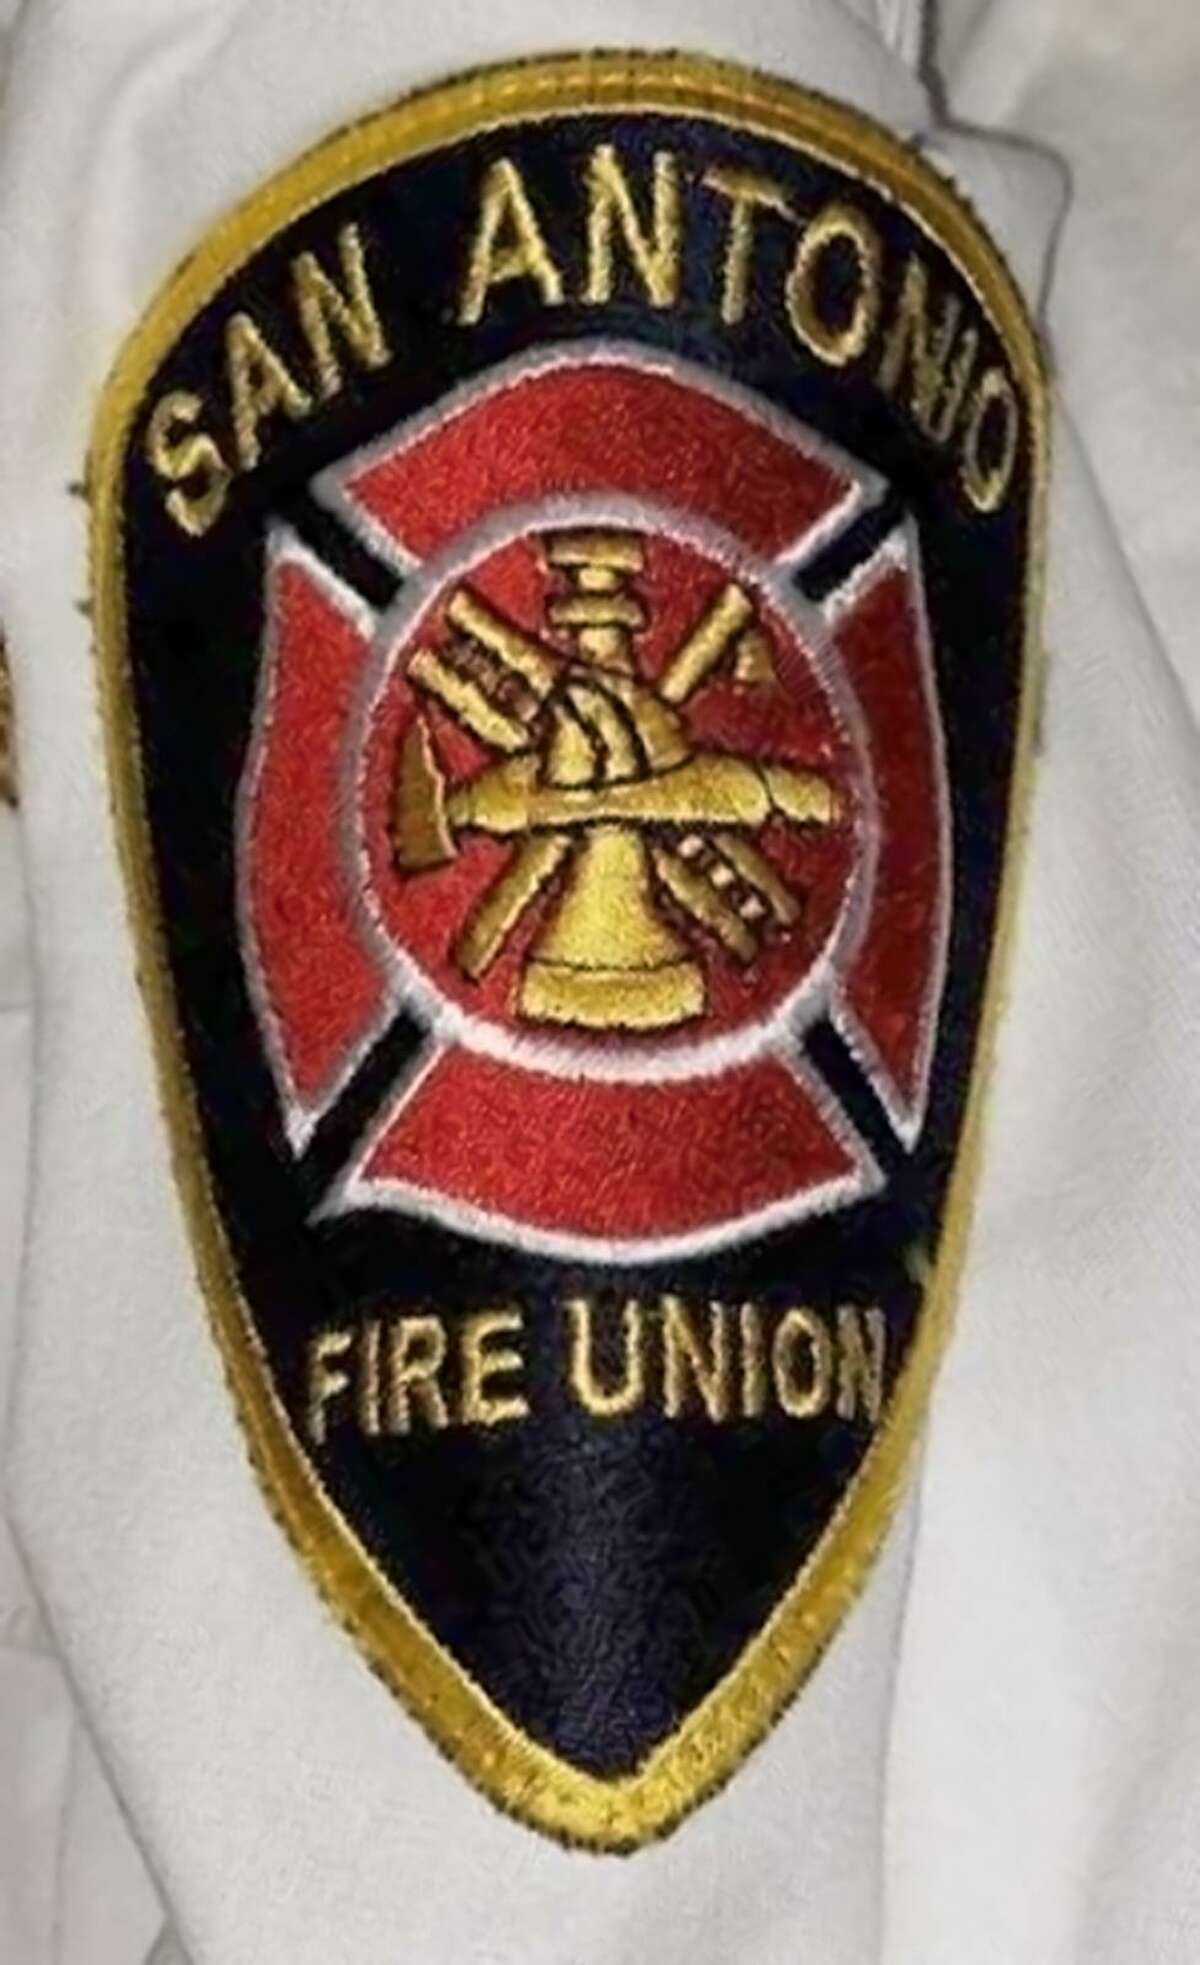 A San Antonio Fire Union patch worn by Chris Steele which closely resembles the official San Antonio Fire Department patch.